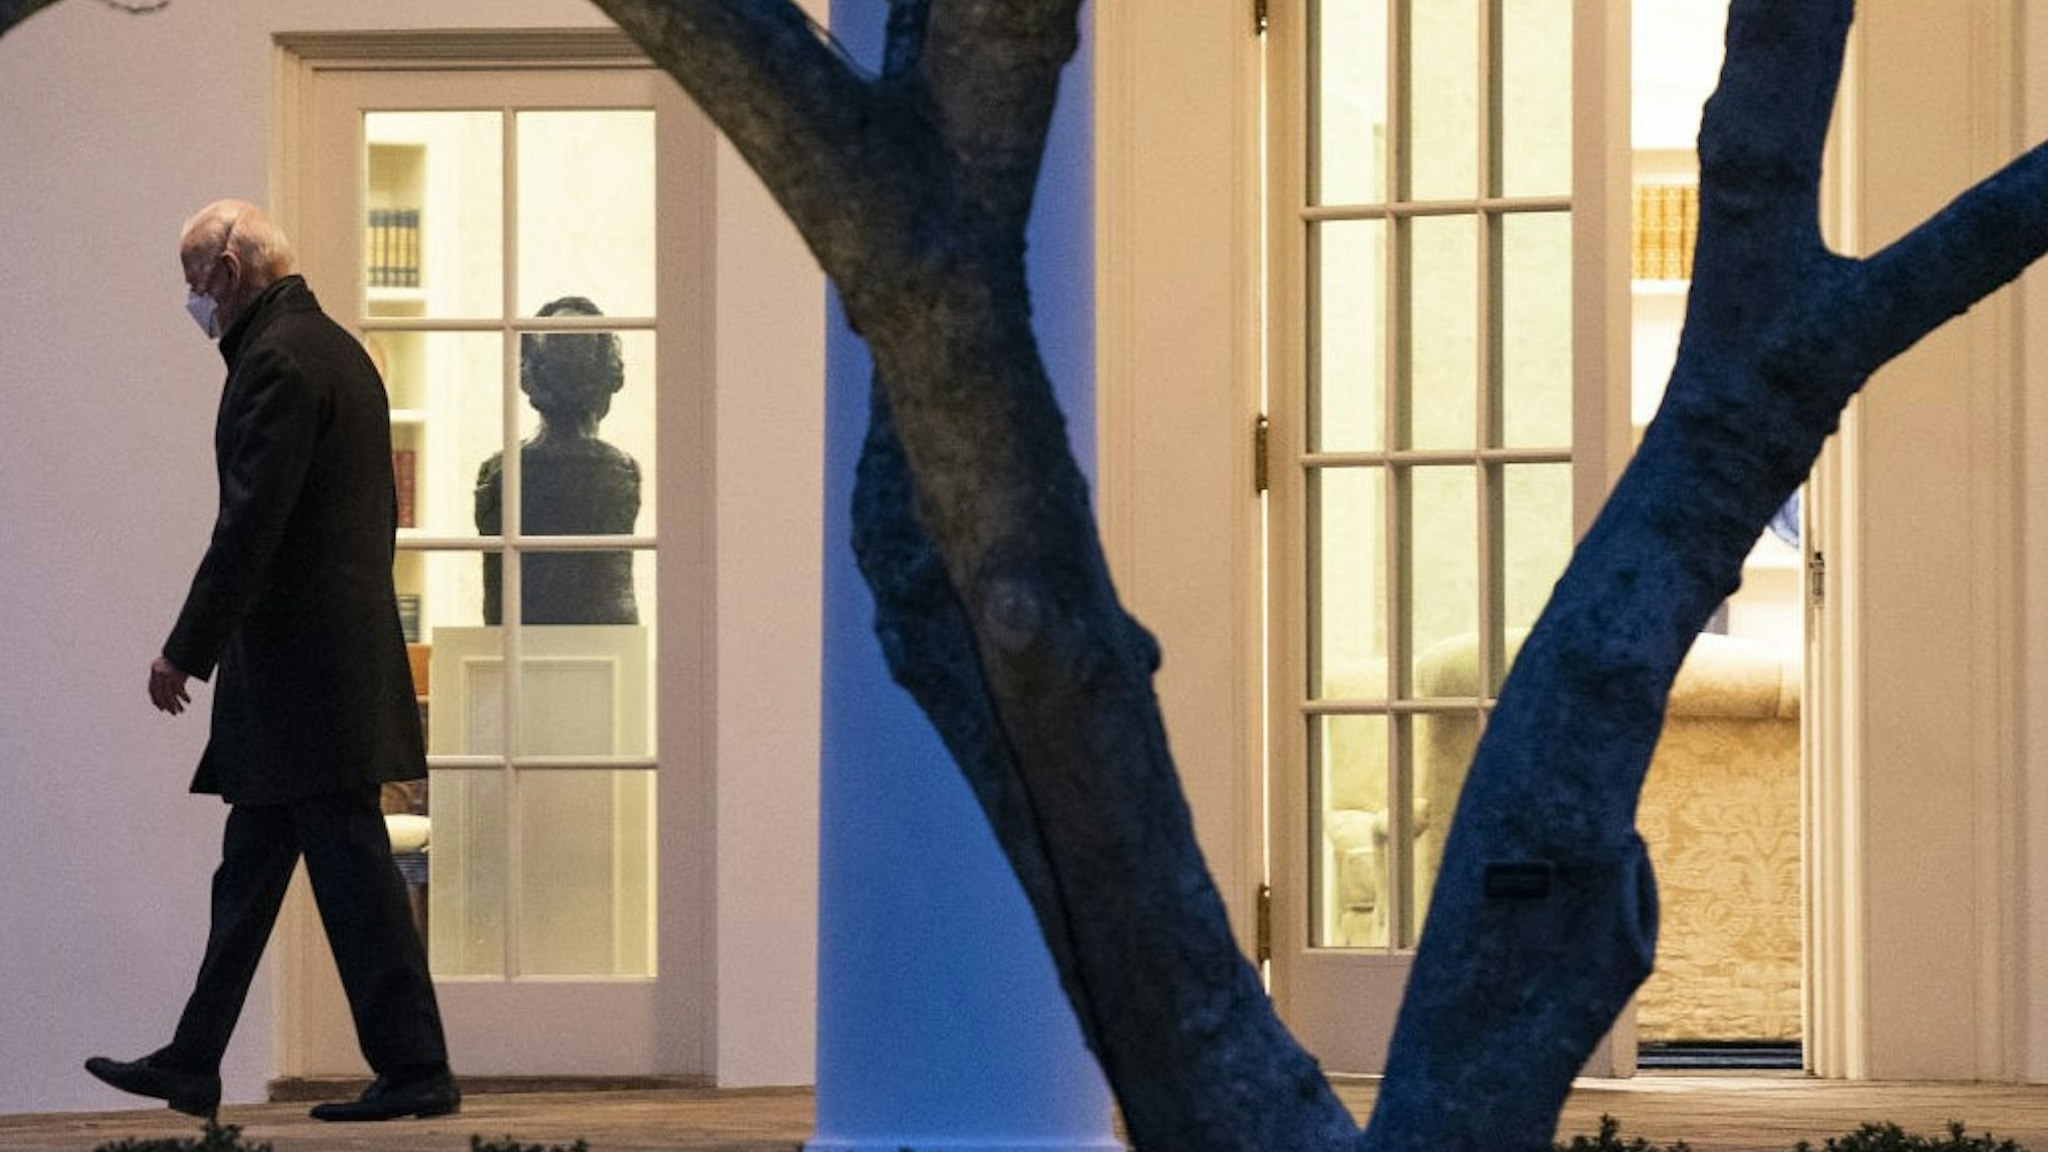 U.S. President Joe Biden walks from the Oval Office of the White House before boarding Marine One in Washington, D.C., U.S., on Friday, Feb. 12, 2021. The Biden administration slowly will begin to admit into the U.S. asylum seekers who were turned away by the Trump administration under the so-called Remain in Mexico policy. Photographer: